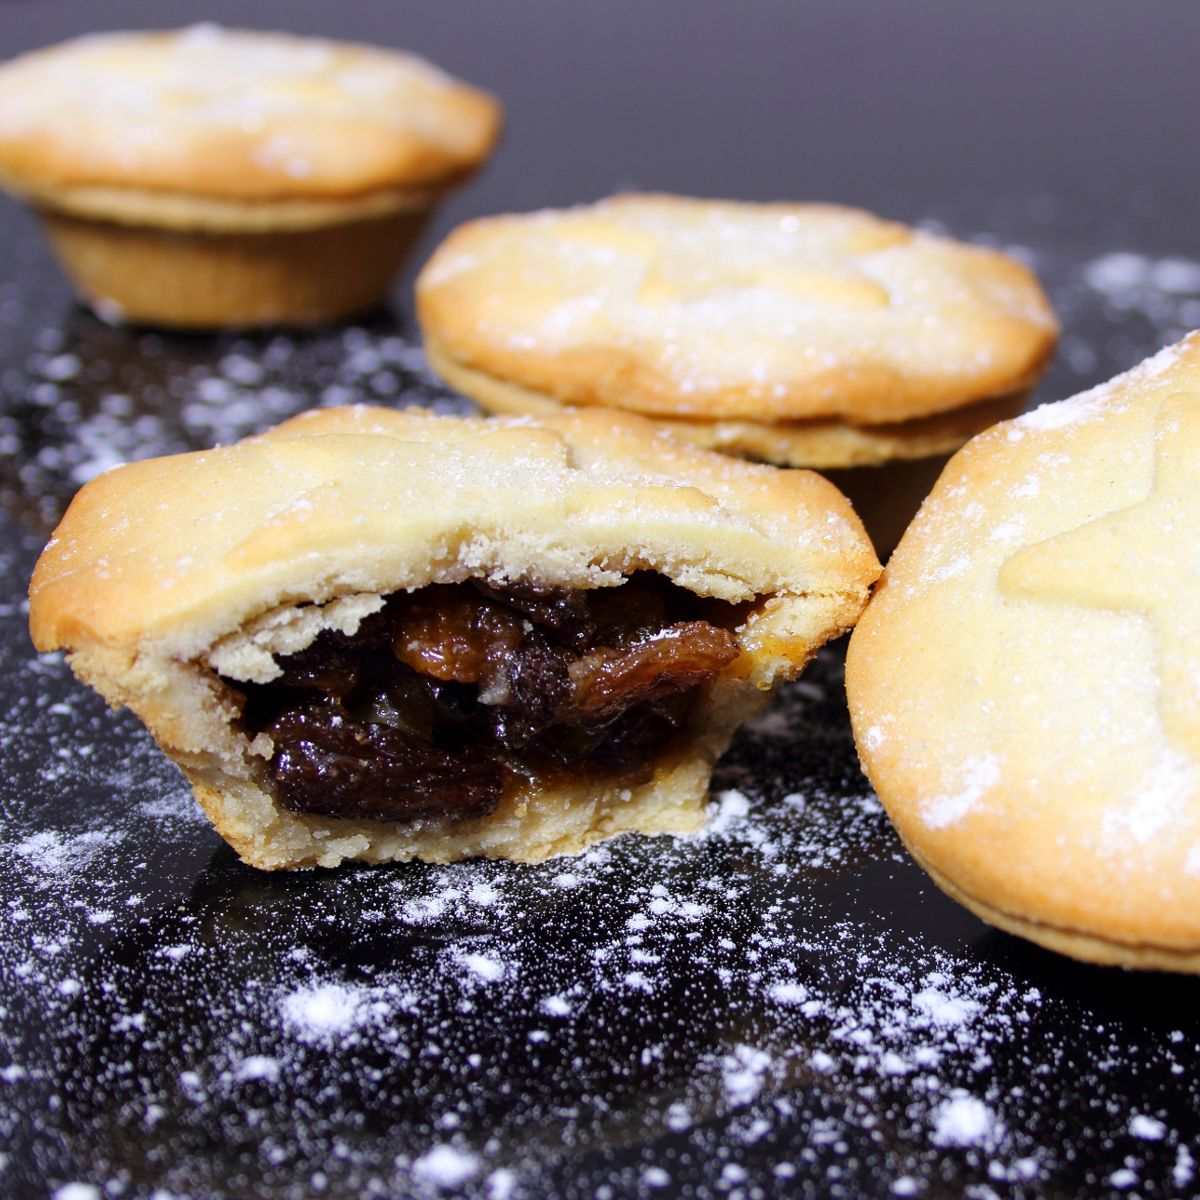 Examination of early Victorian recipes shows that mince pies were initially made from meat, a tradition dating back to Tudor times. However, during the 19th century there was a revolution in the composition of this festive dish.